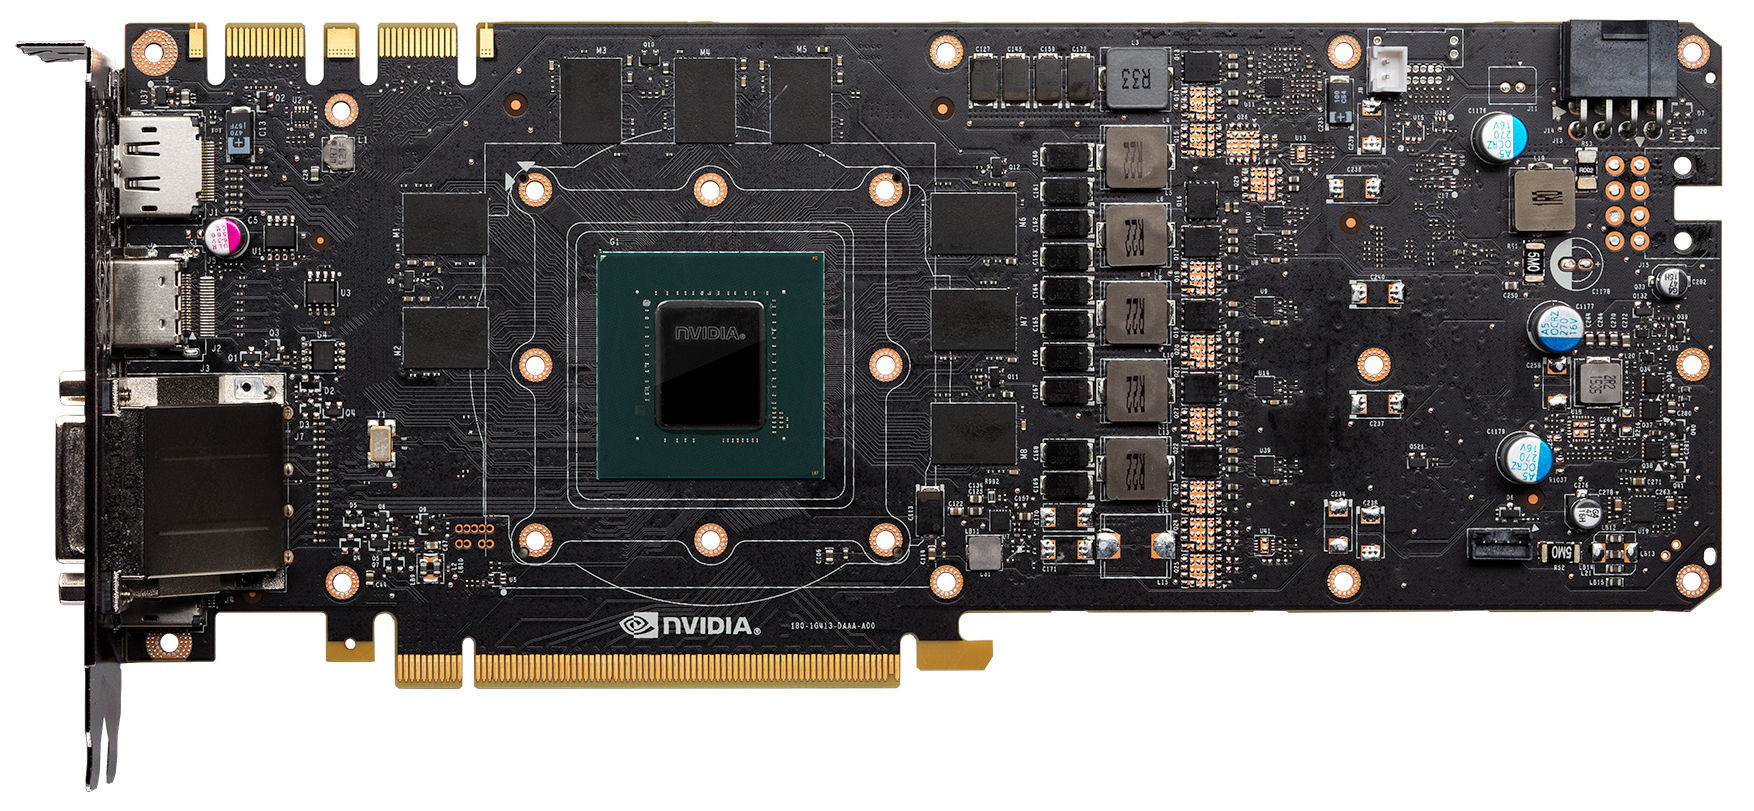 NVIDIA GeForce GTX 1070 Reference PCB Pictured | TechPowerUp